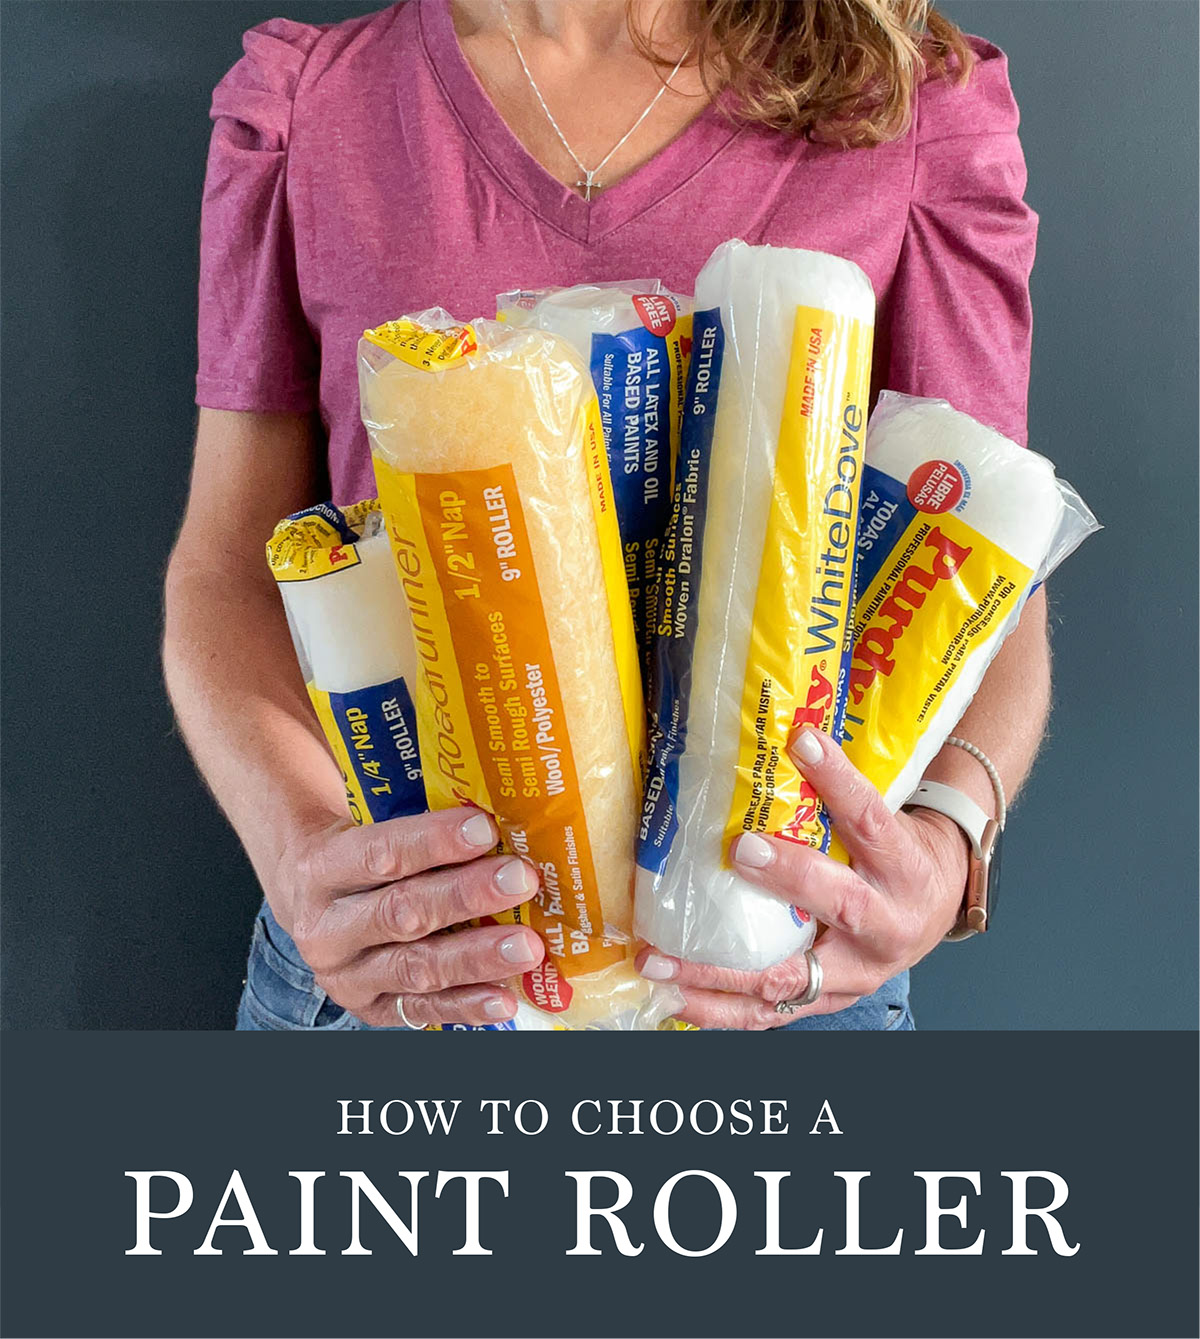 How to Choose a Paint Roller - Sincerely, Sara D.